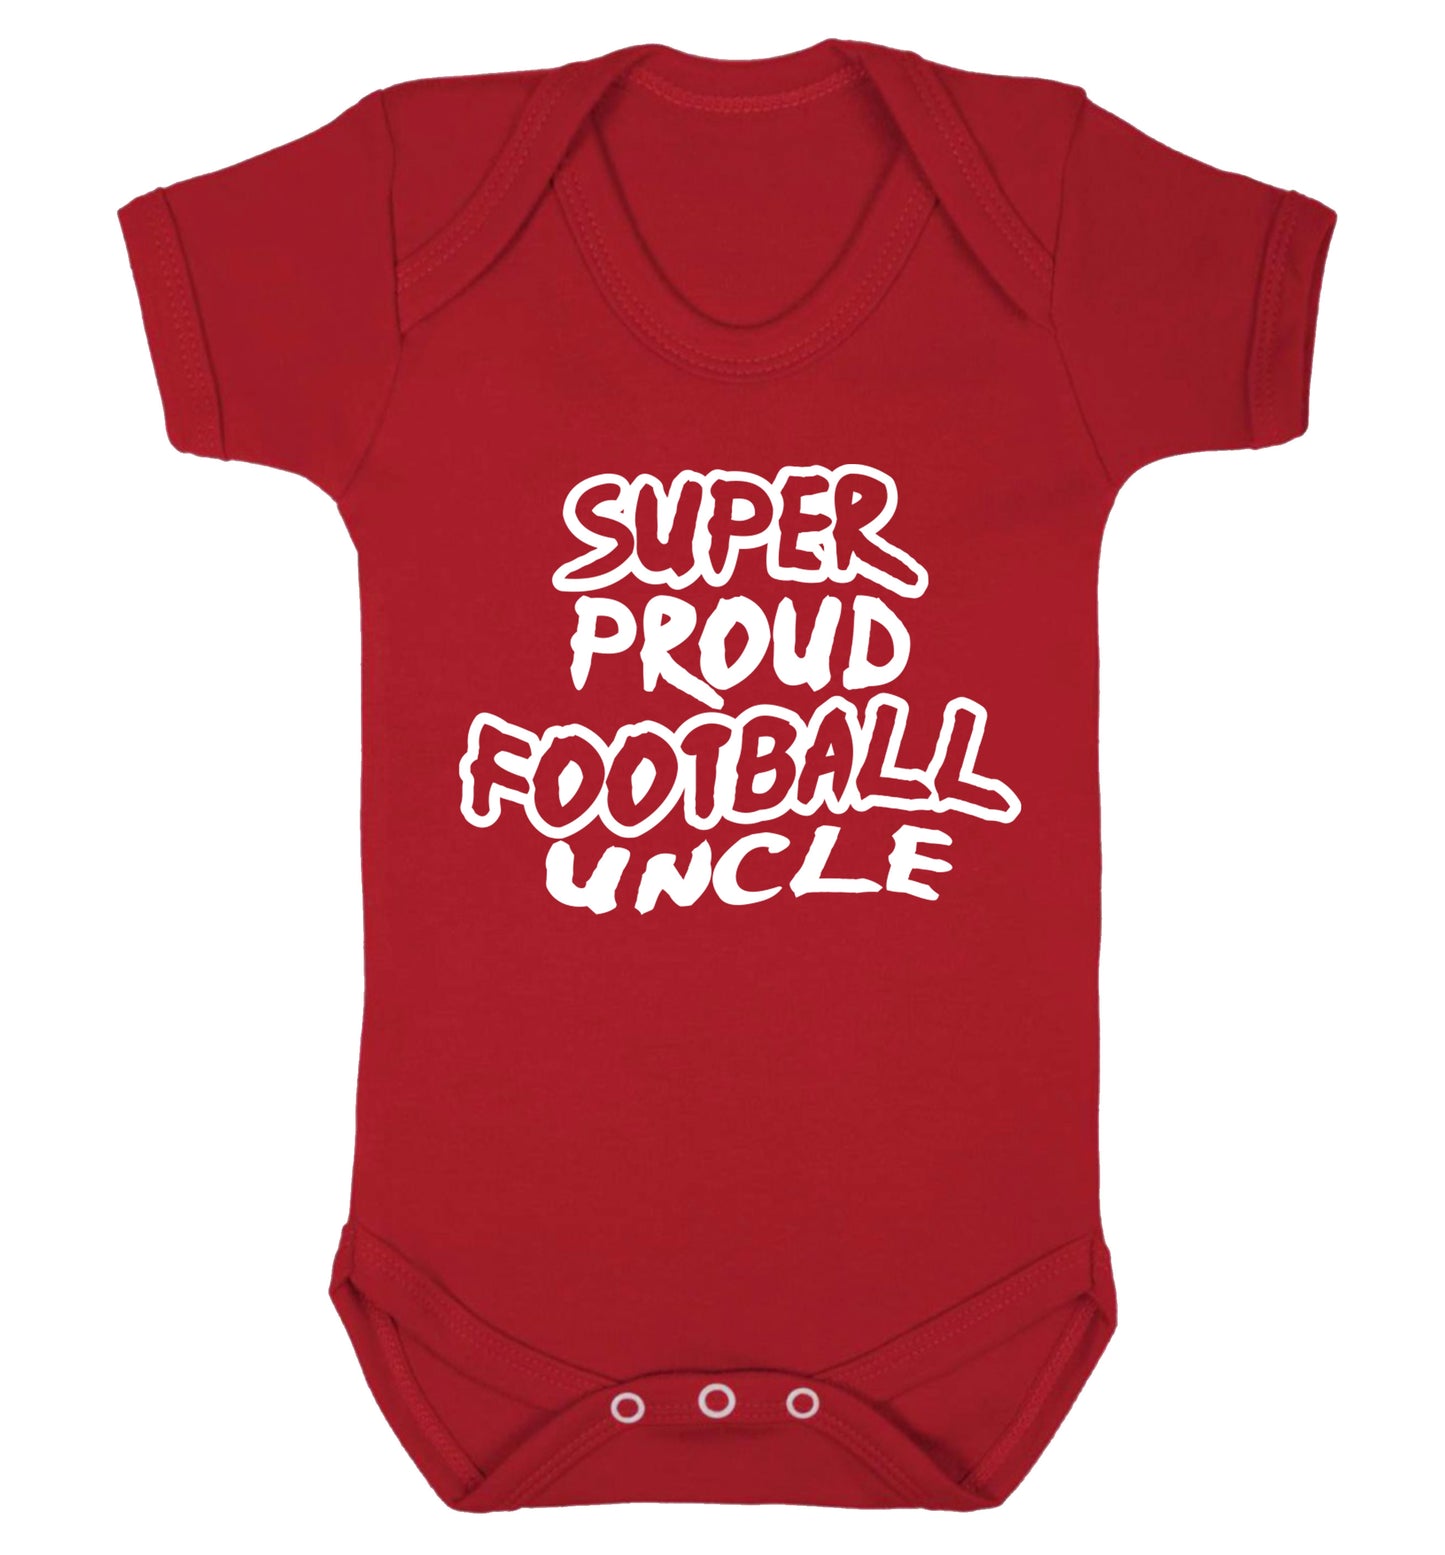 Super proud football uncle Baby Vest red 18-24 months